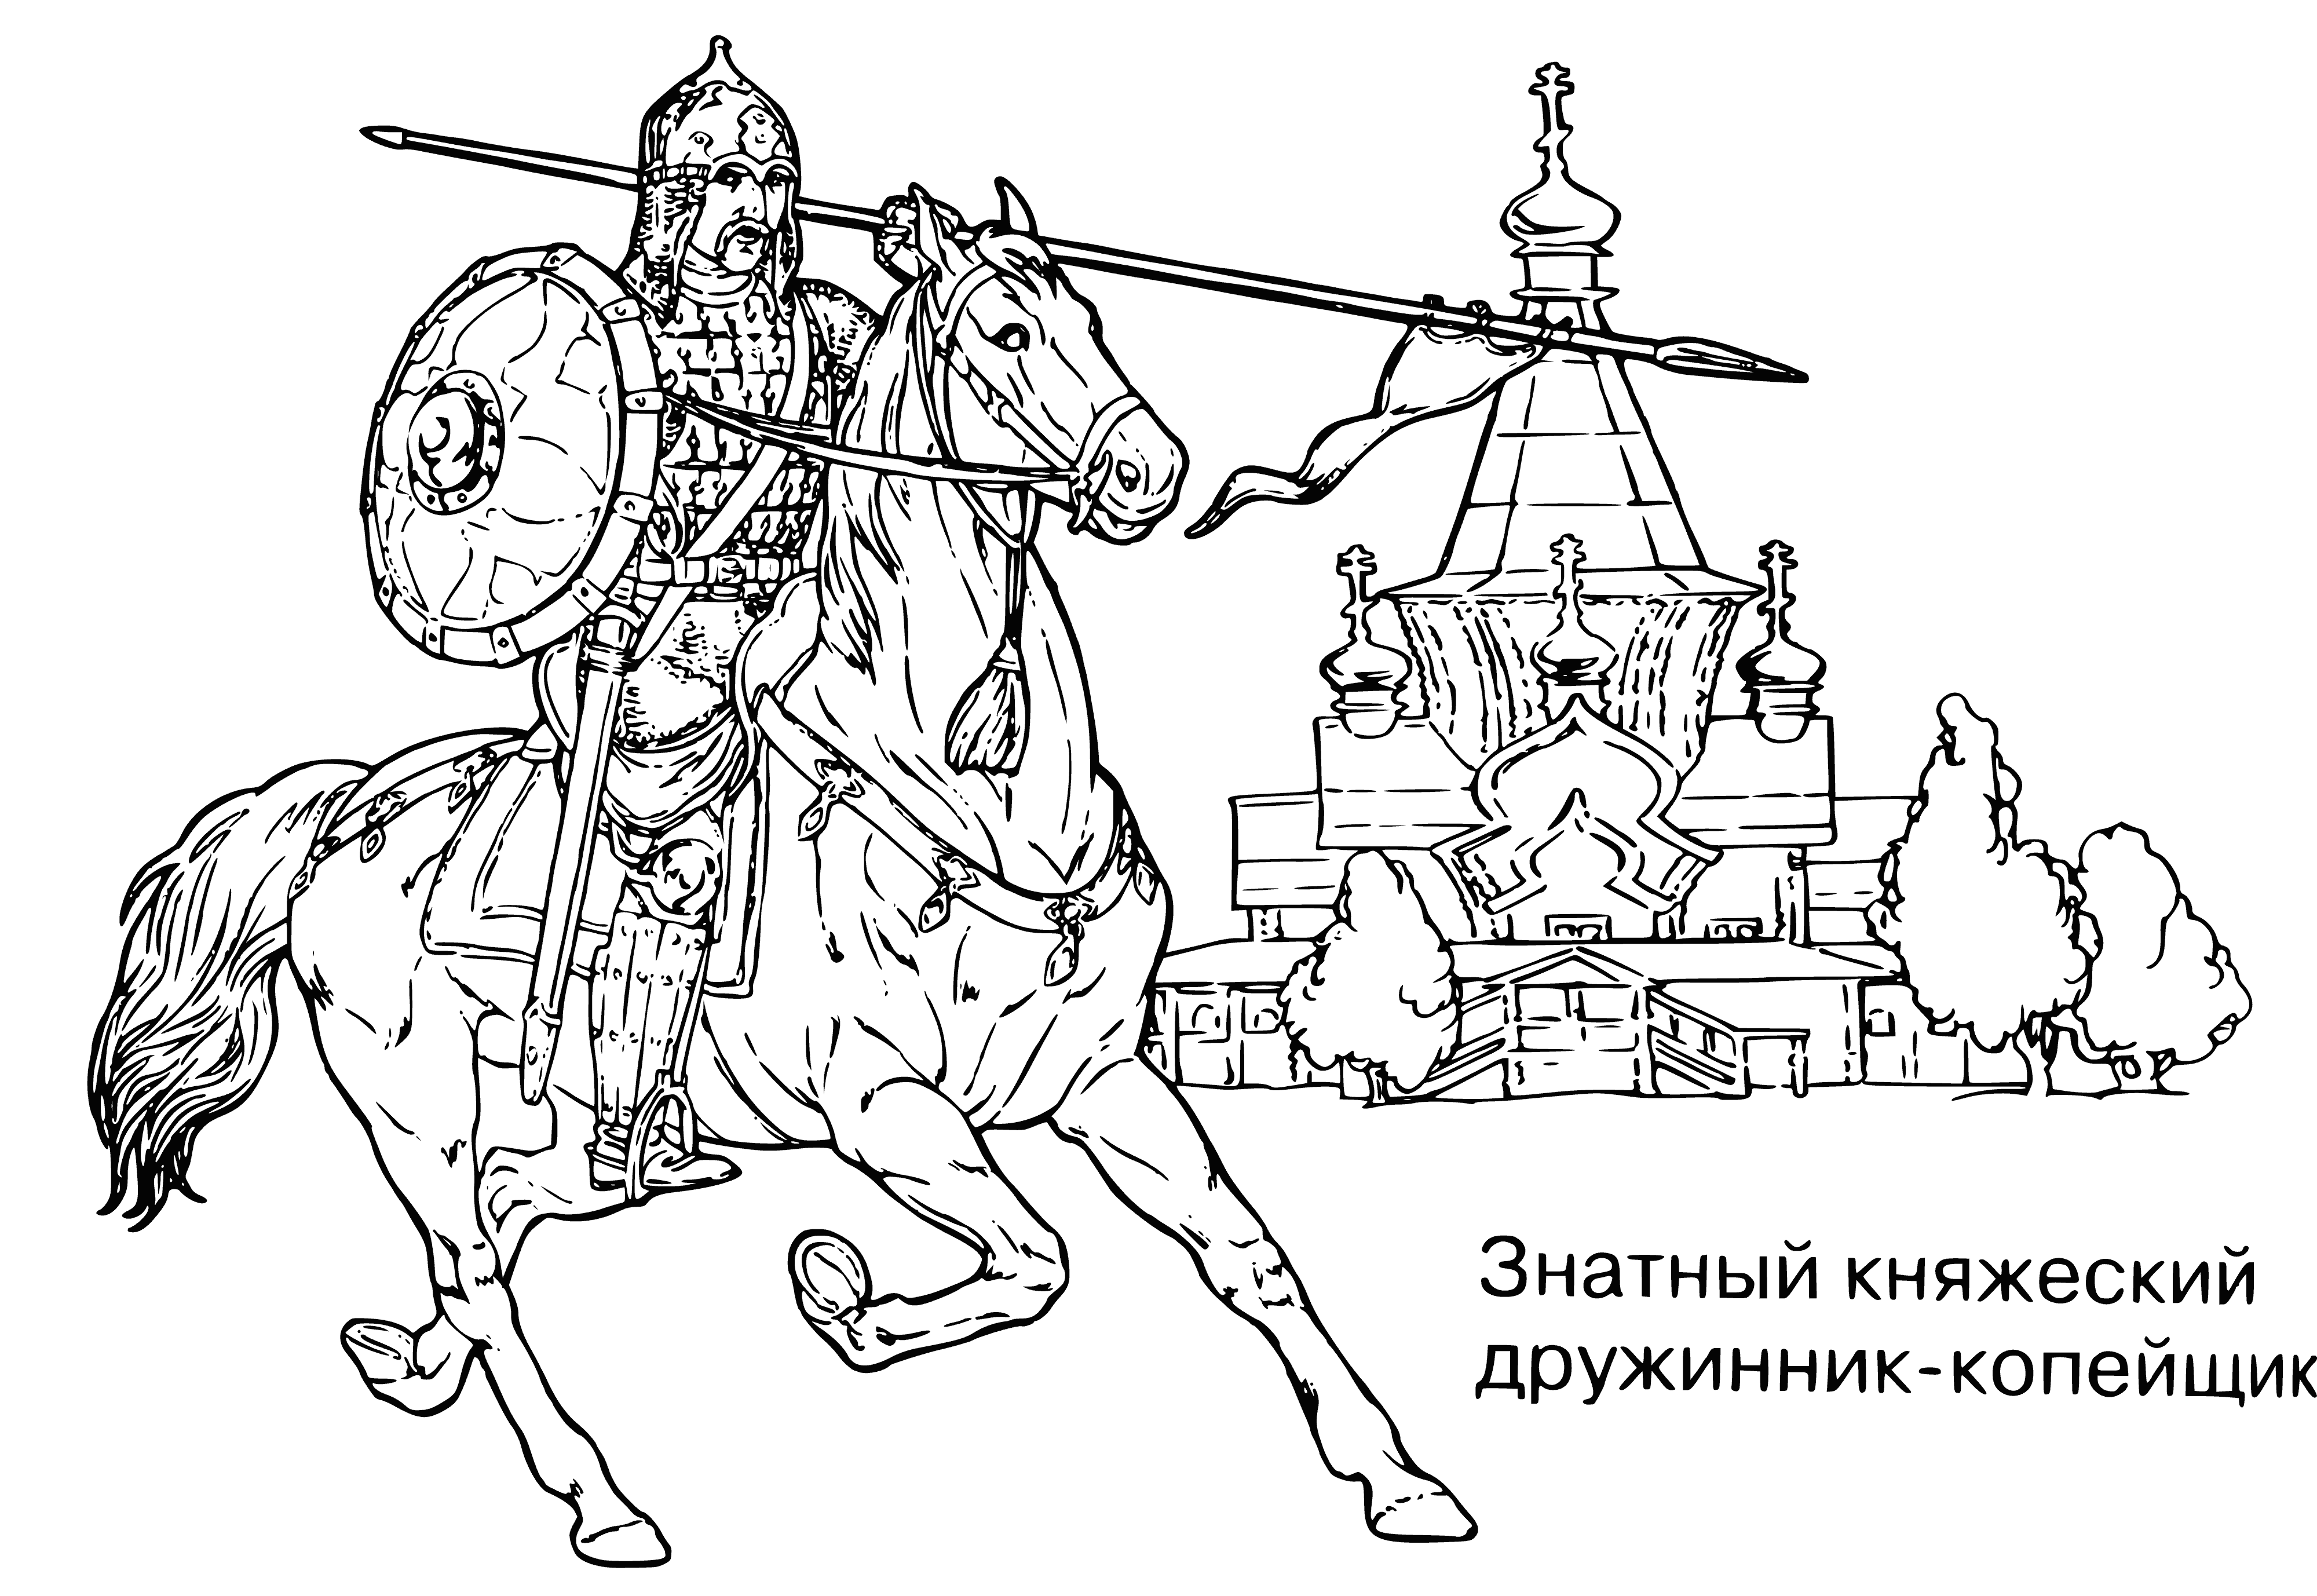 coloring page: A spearman is a brave warrior skilled with a versatile weapon: the spear - thrust or thrown in battle.